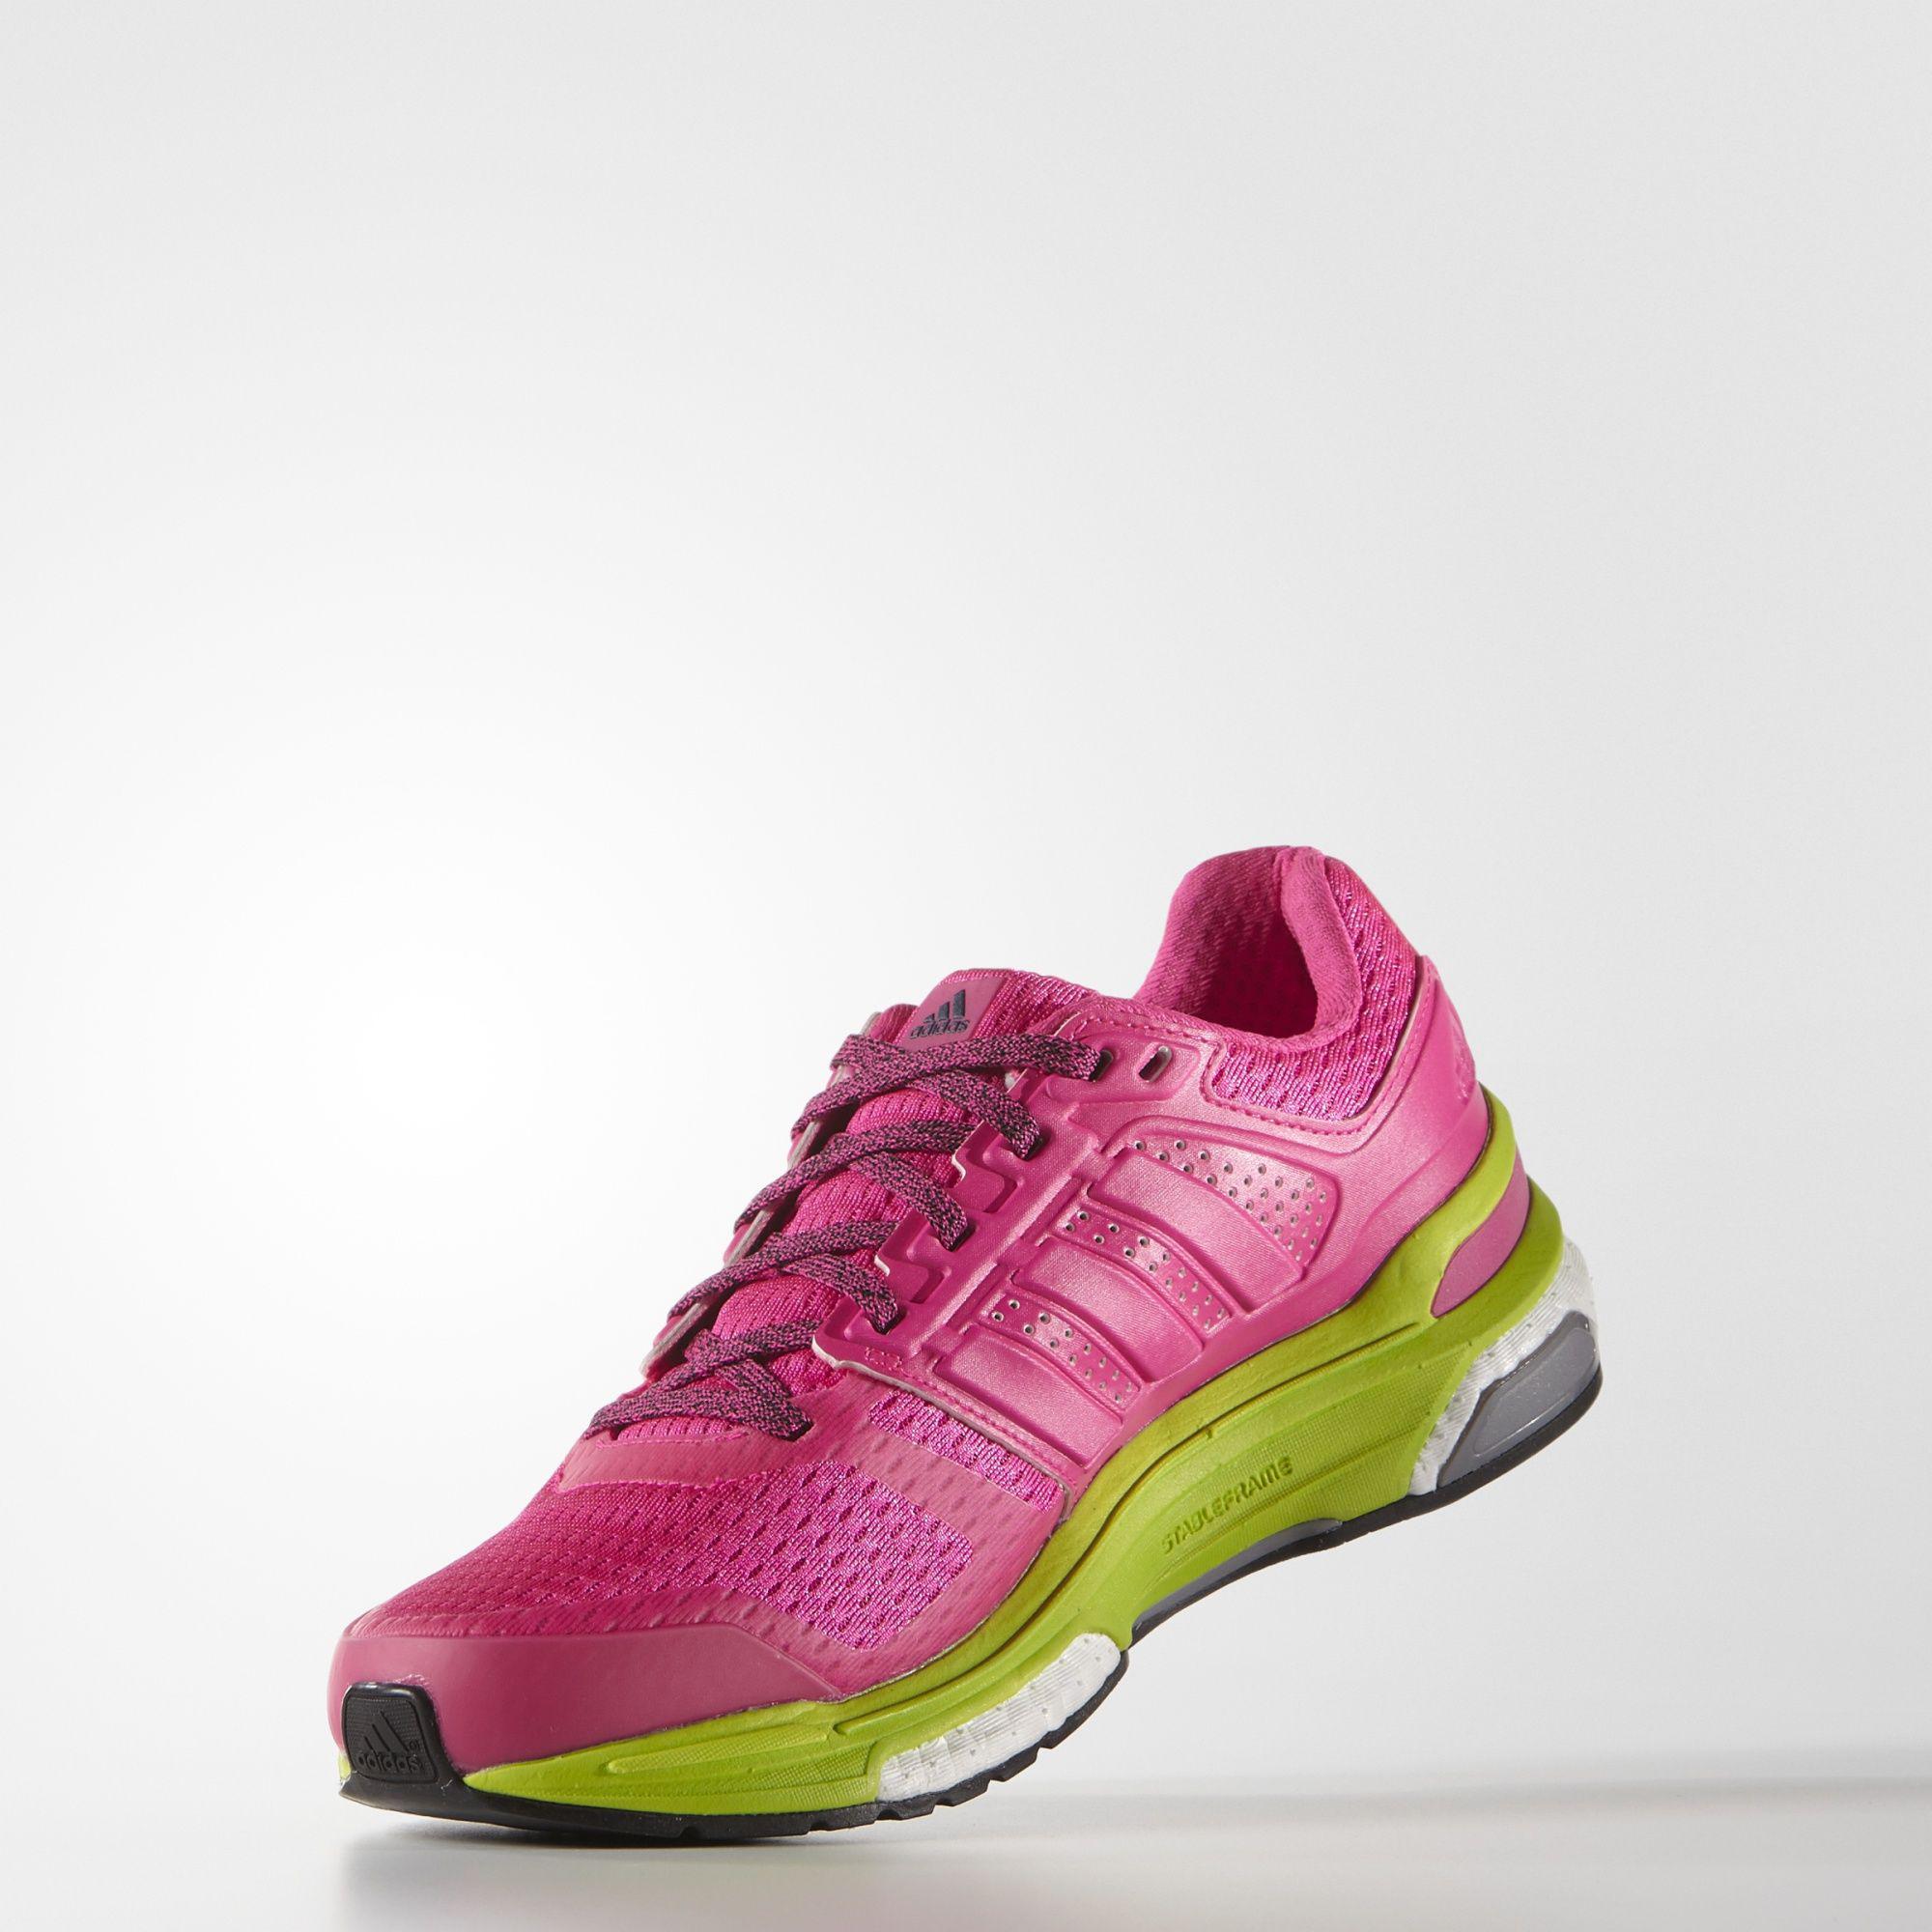 Adidas Womens Supernova Sequence 8 Boost Running Shoes - Pink ...